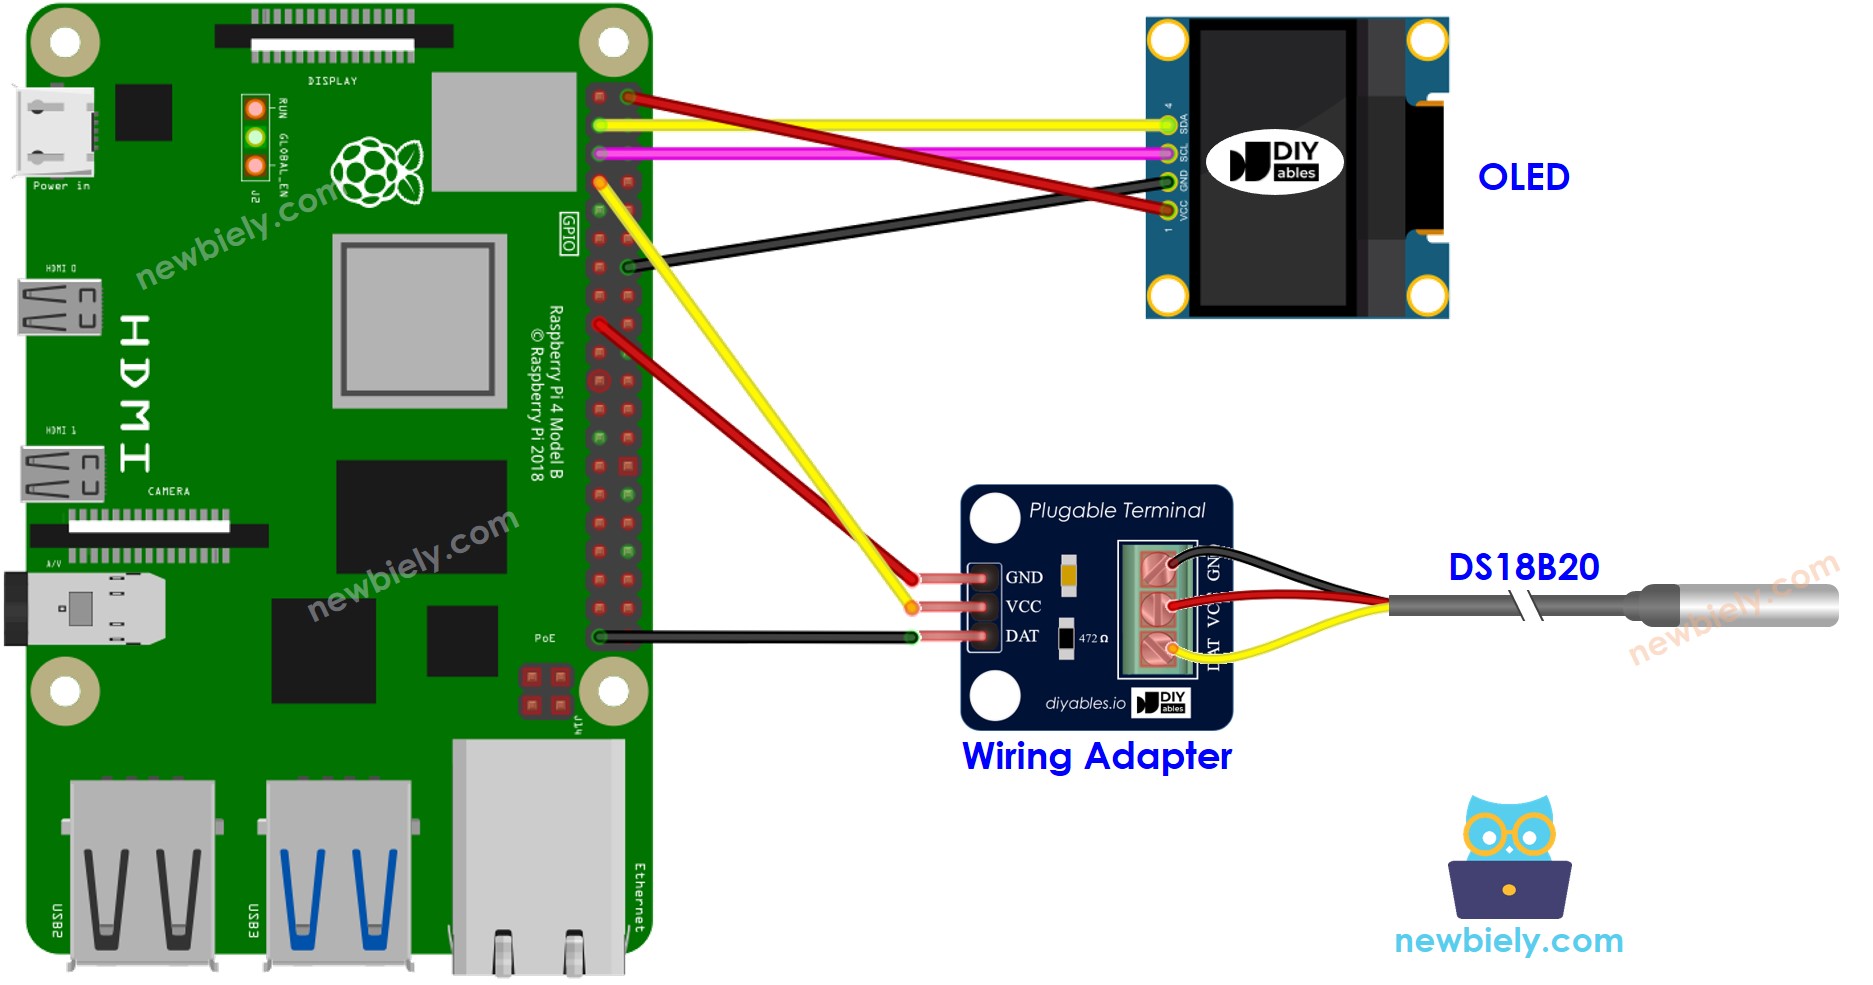 The wiring diagram between Raspberry Pi and DS18B20 Temperature Sensor OLED